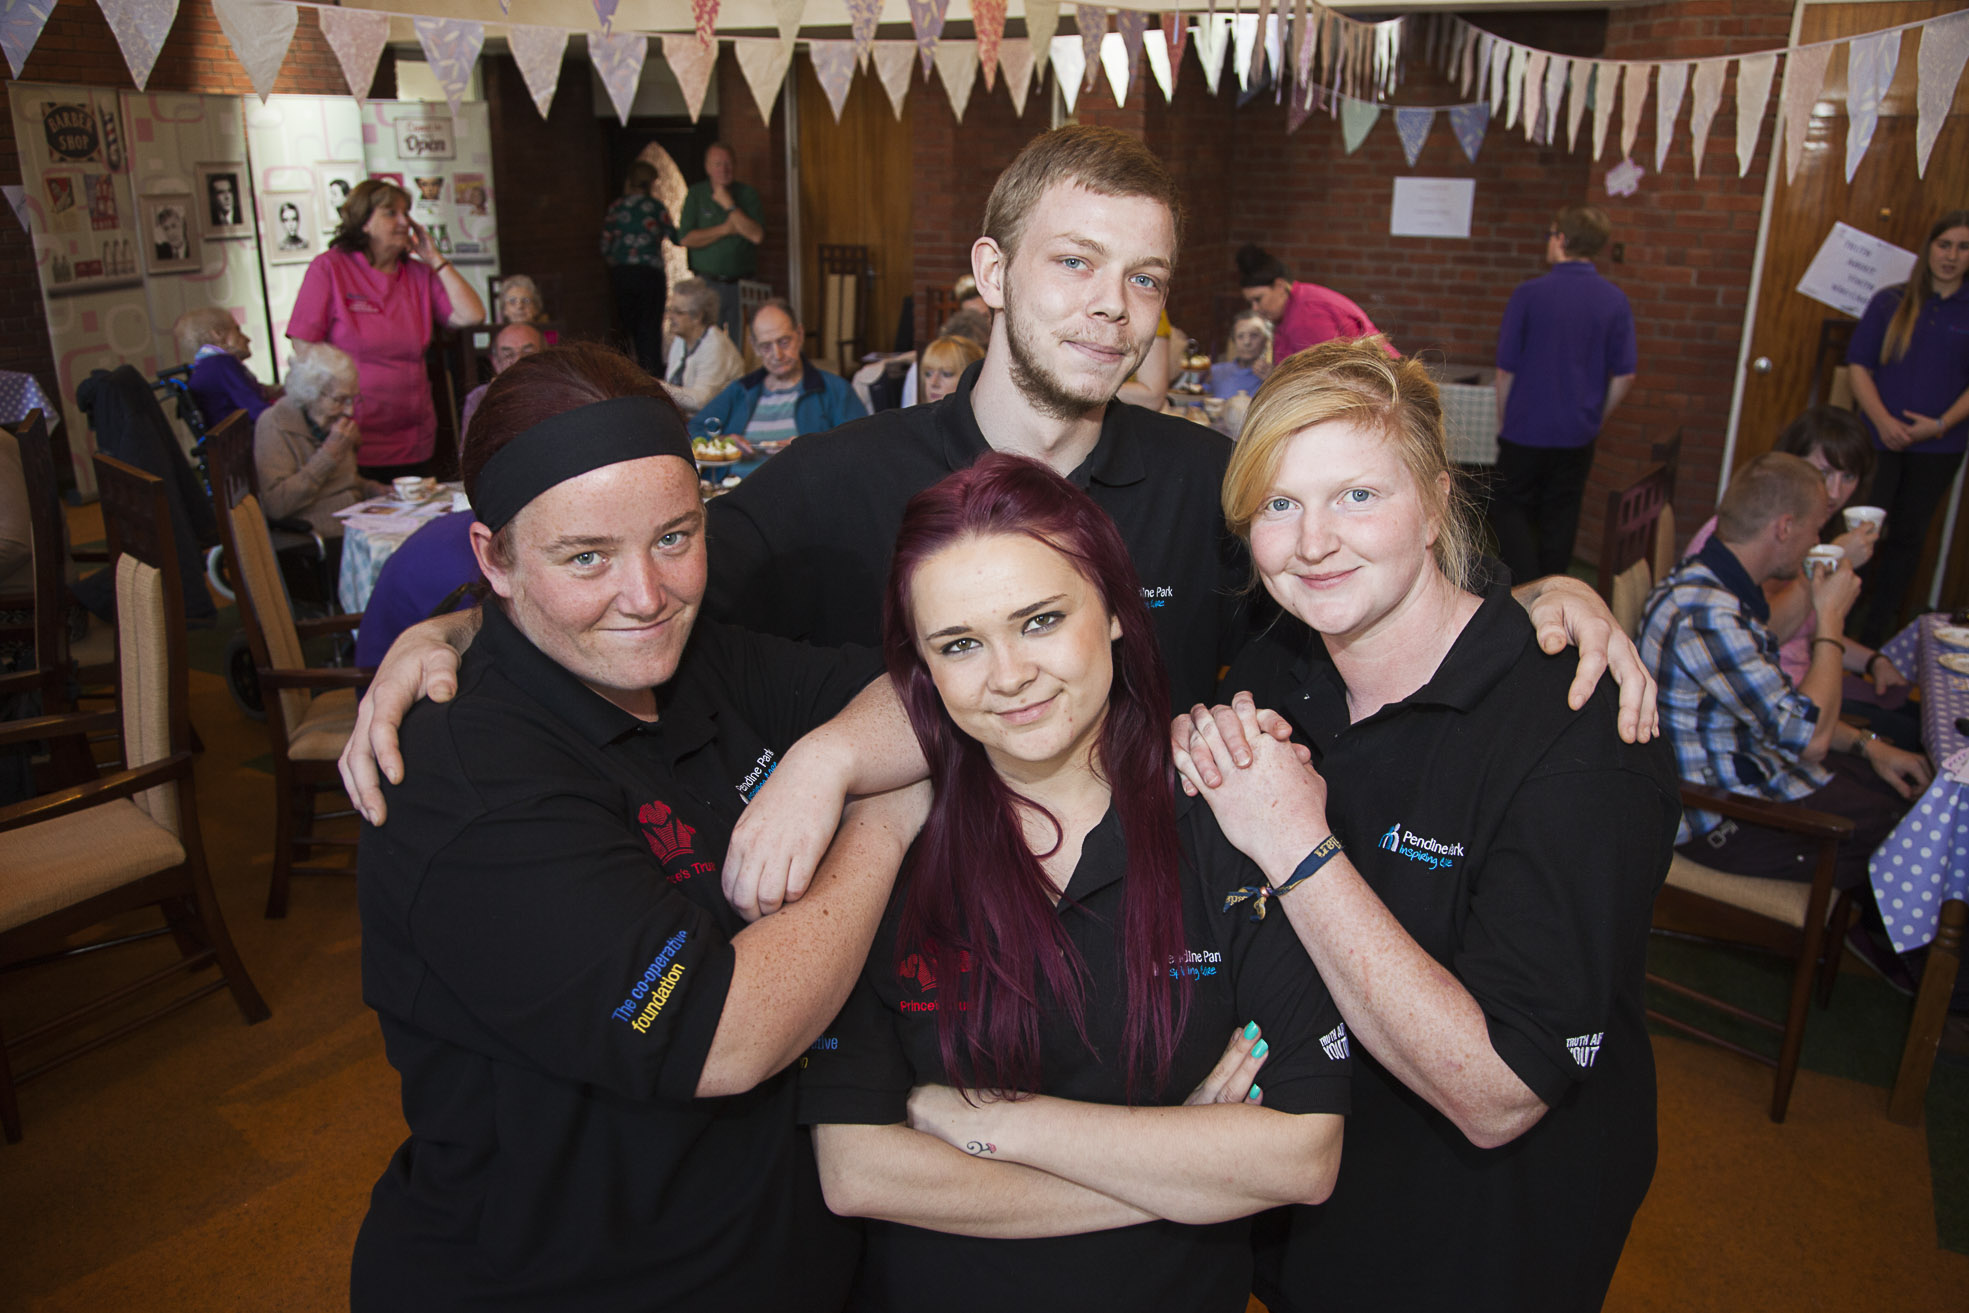 Life-changing training scheme helps young people into jobs